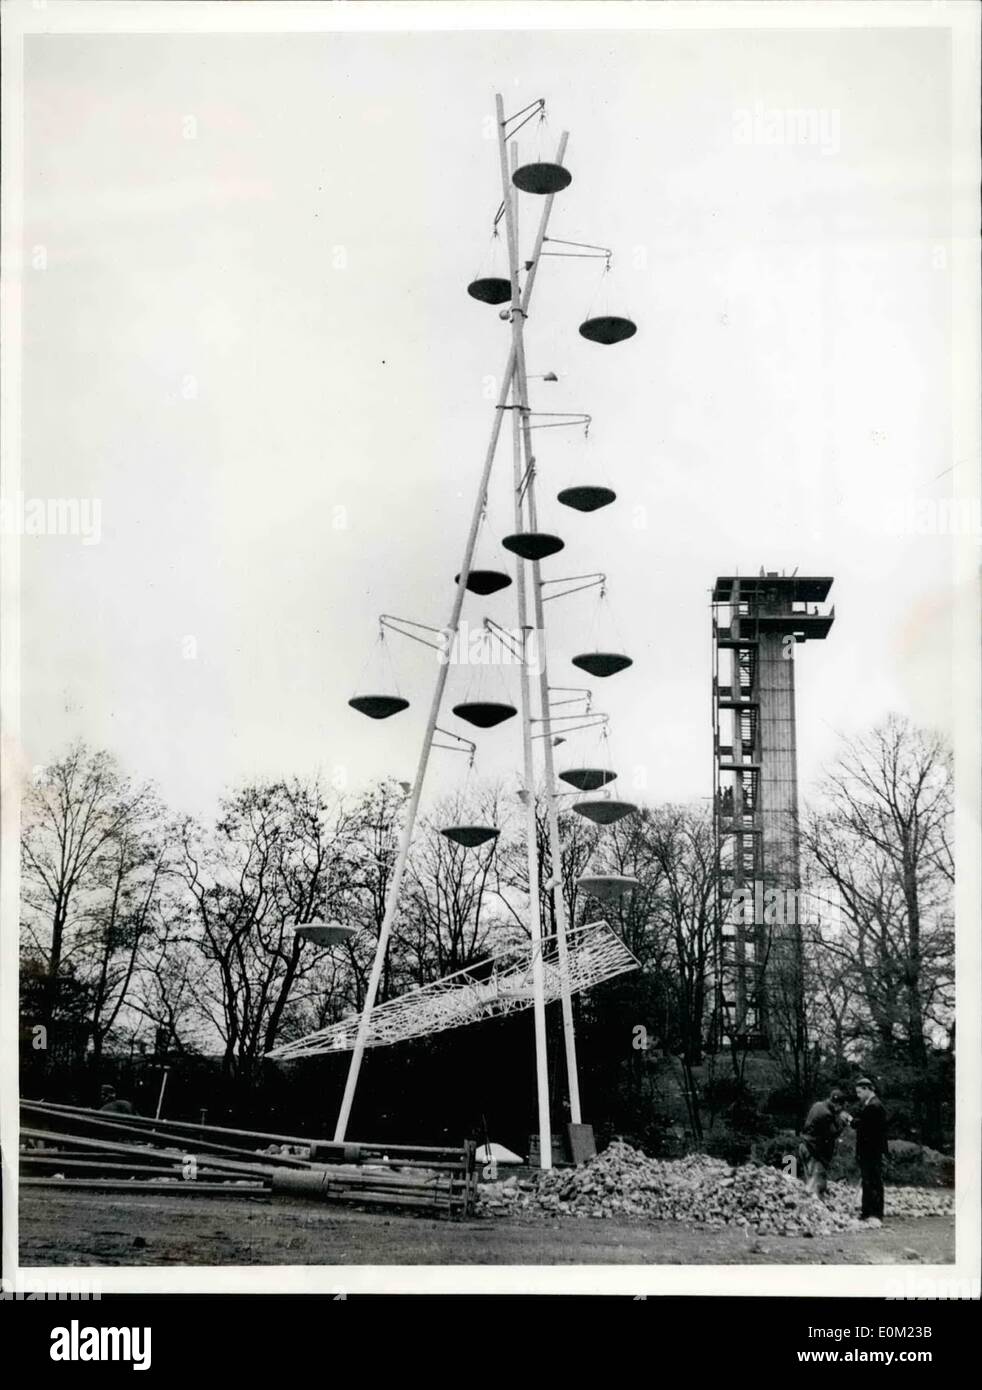 Apr. 04, 1953 - International Horticultural show in Hamburg: This curious flower-stand is in the limelight of all visitors on the international horticultural show which will be opened on April 30th in Hamburg, North-Germany. In these bowls hanging flowers will be planted. Stock Photo